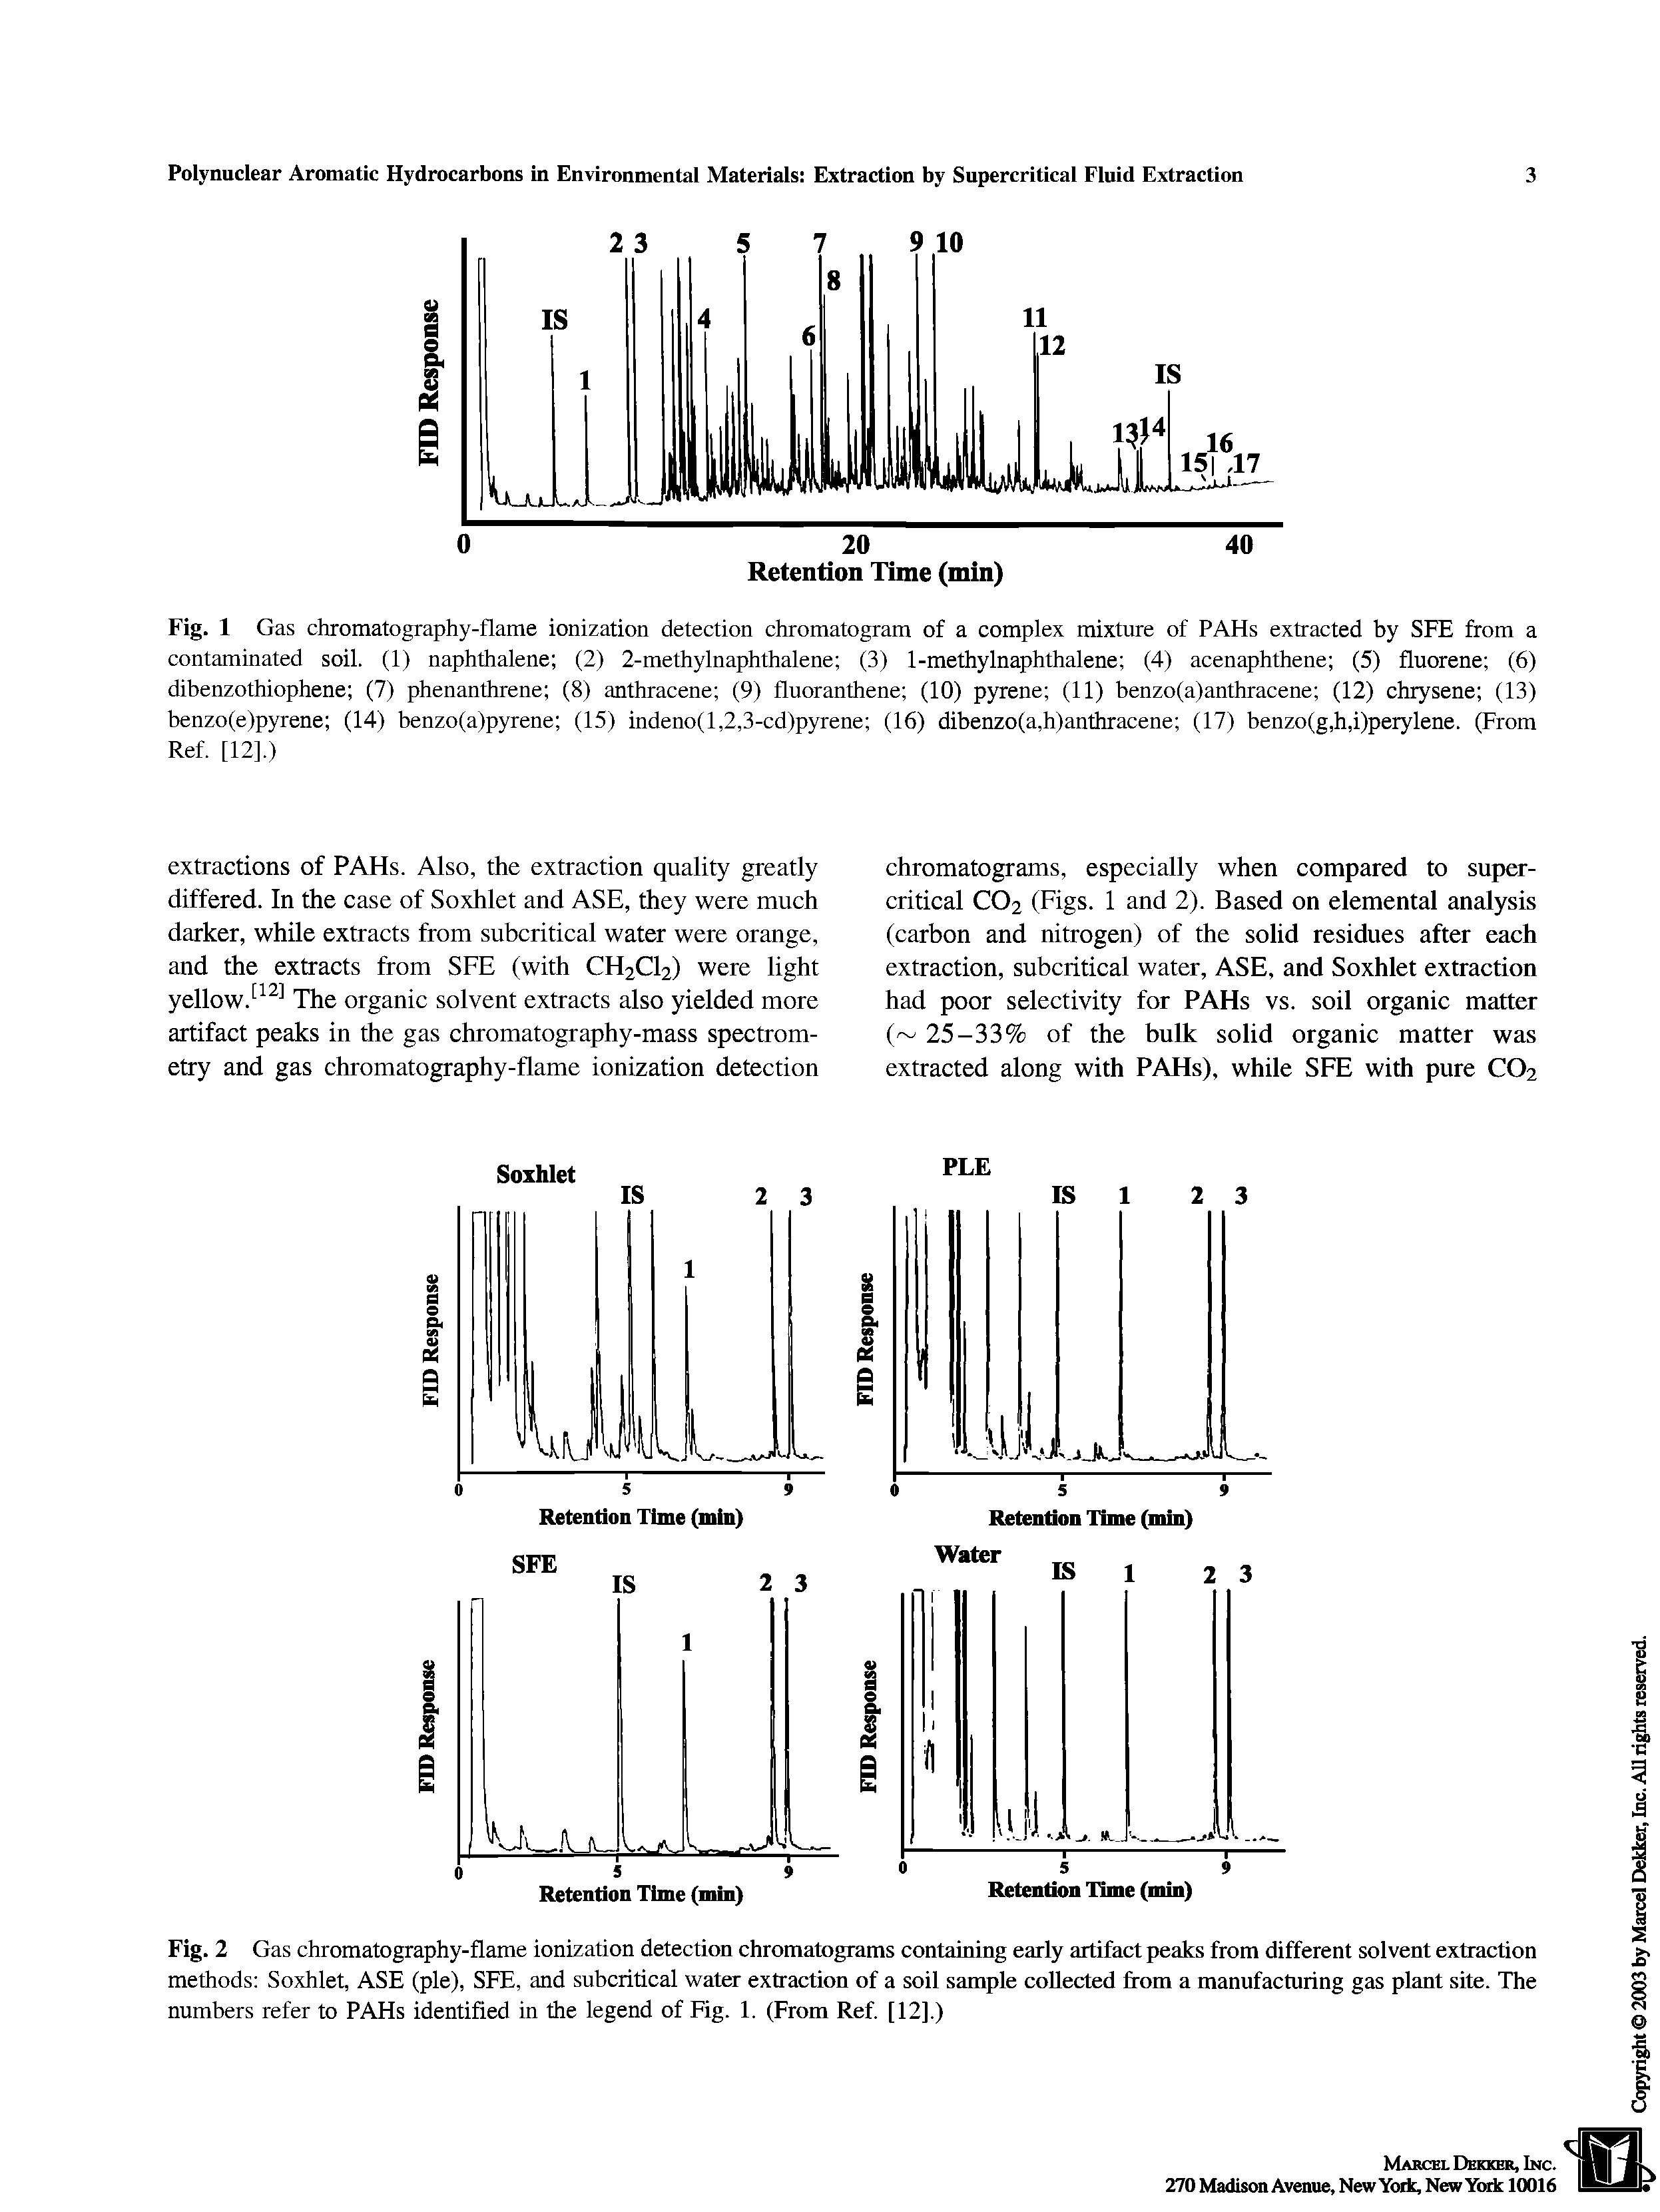 Fig. 2 Gas chromatography-flame ionization detection chromatograms containing early artifact peaks from different solvent extraction methods Soxhlet, ASE (pie), SEE, and subcritical water extraction of a soil sample collected from a manufacturing gas plant site. The numbers refer to PAHs identified in the legend of Fig. 1. (From Ref. [12].)...